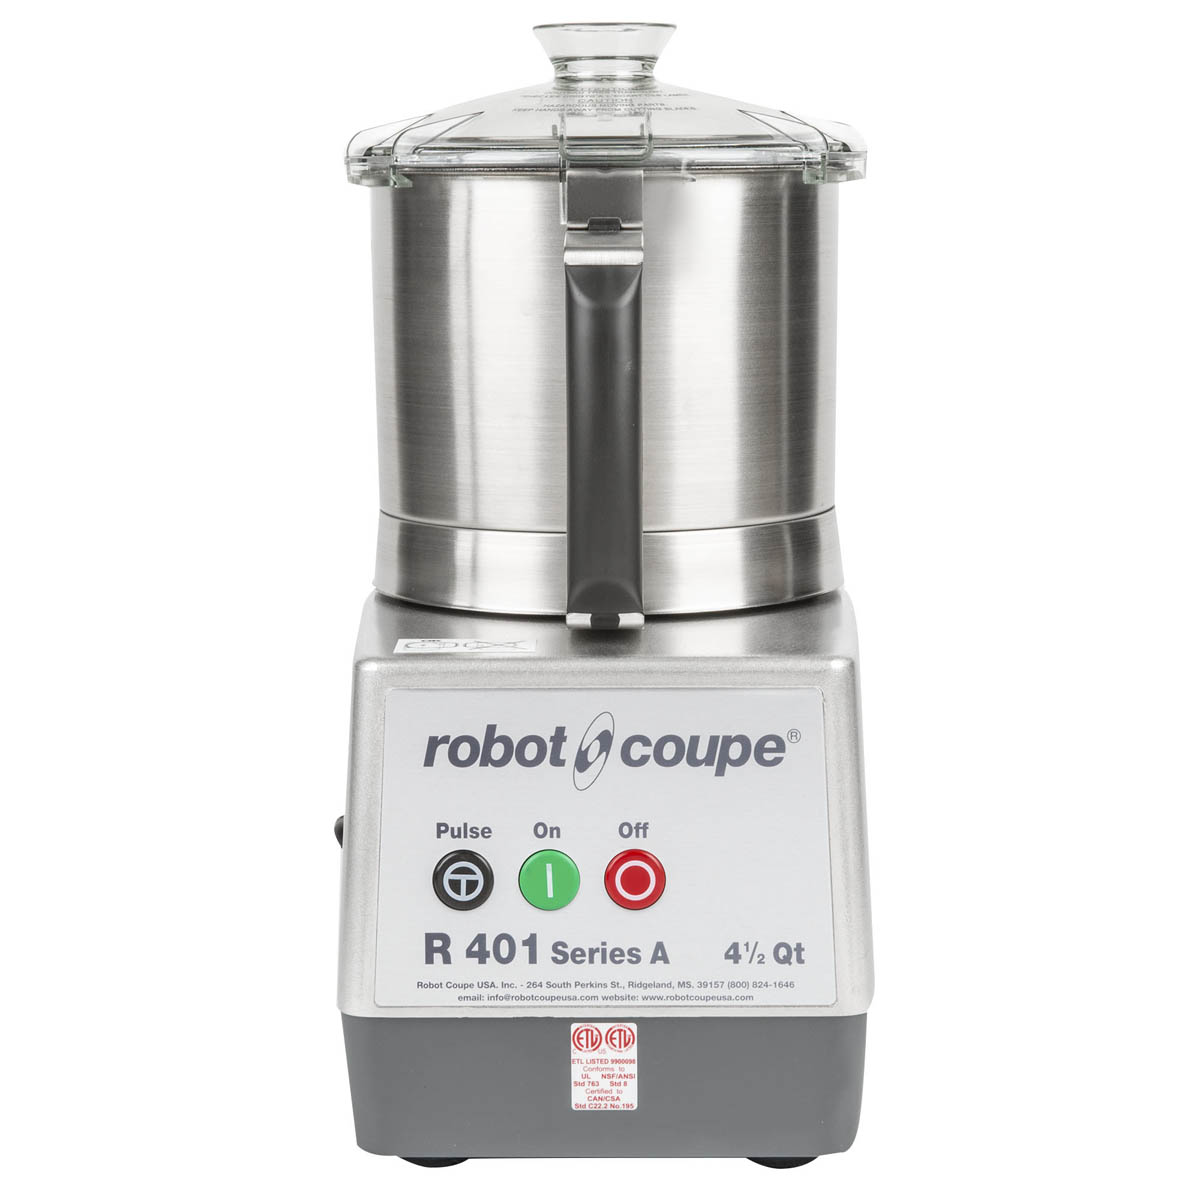 Robot Coupe R401 Combination Food Processor, Cutter / Mixer